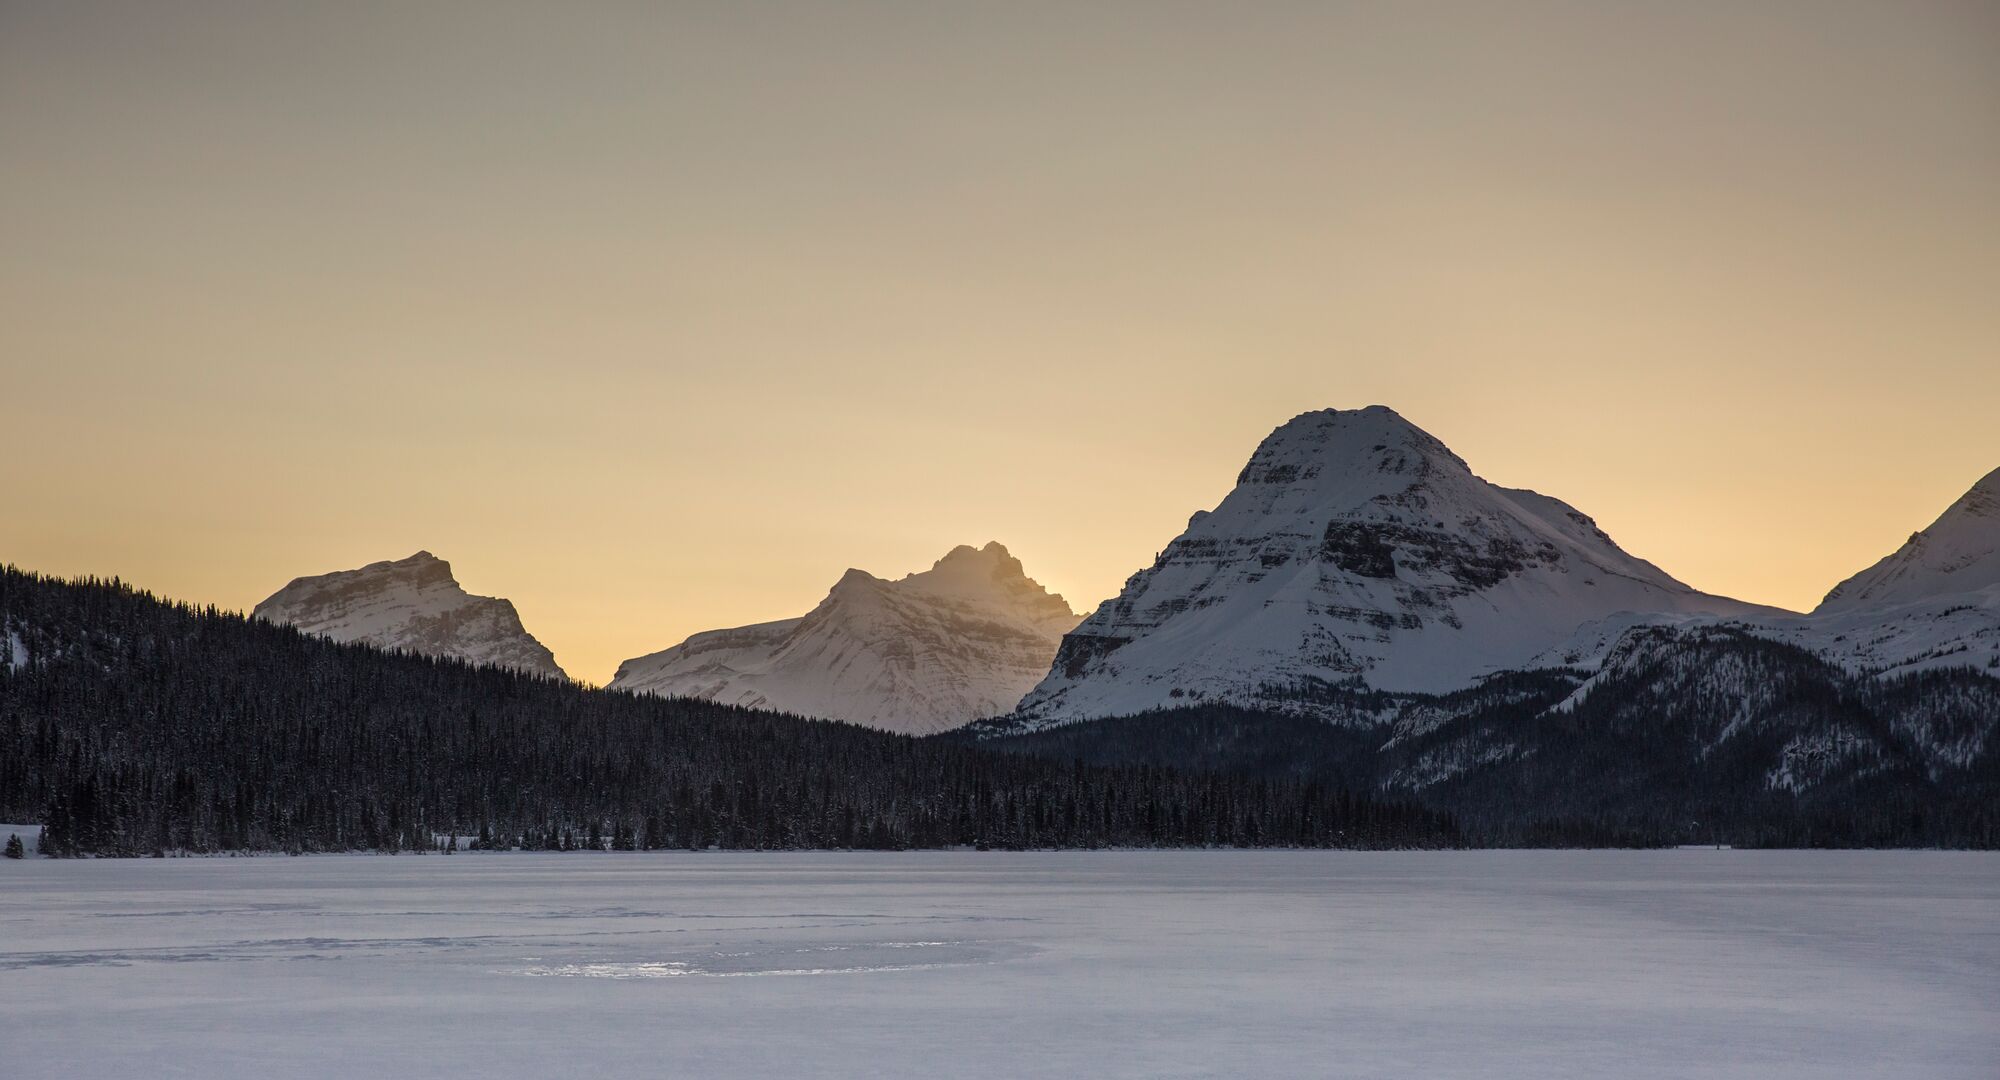 Bow Lake at sunrise on the Icefields Parkway in the winter